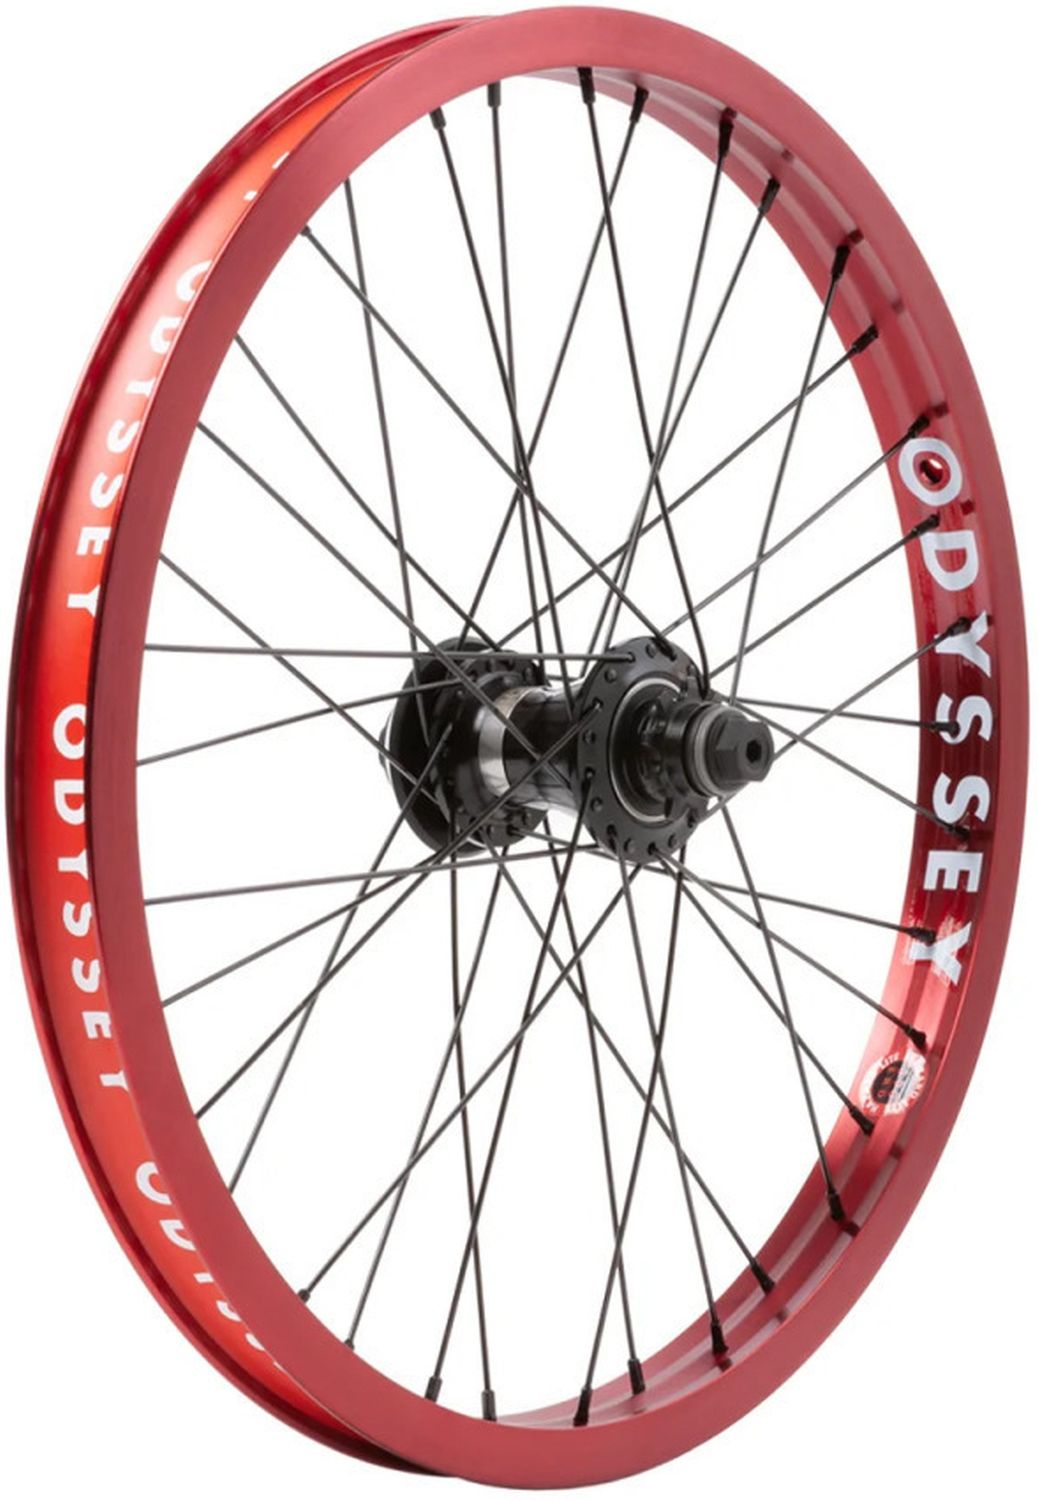 ROUE ARRIERE ODYSSEY HAZARD LITE FREECOASTER CLUTCH V2 ANODIZED RED